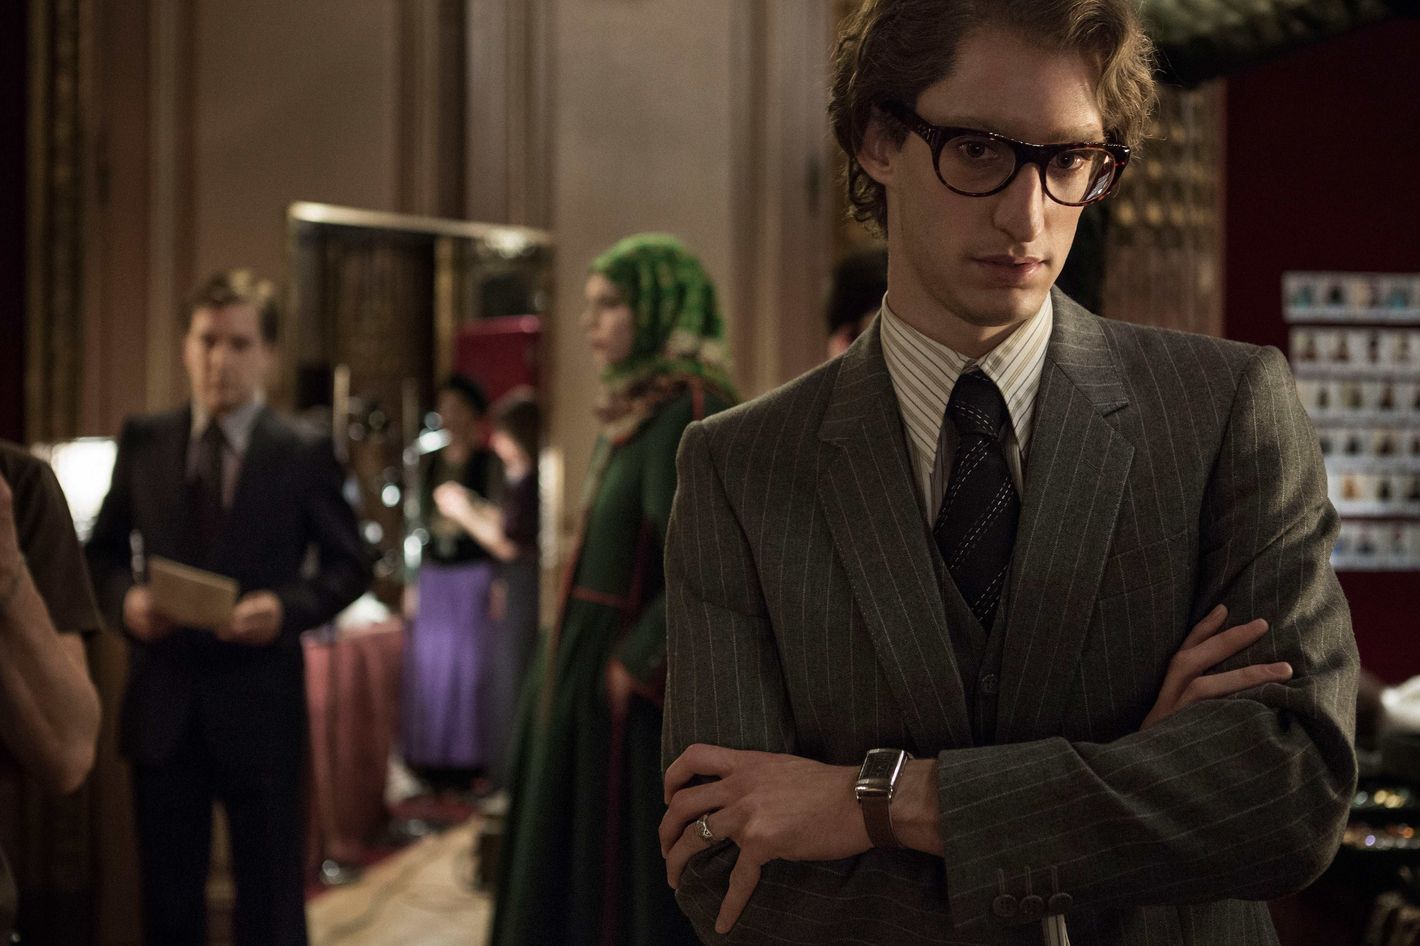 4 Things to Know About the Yves Saint Laurent Biopic